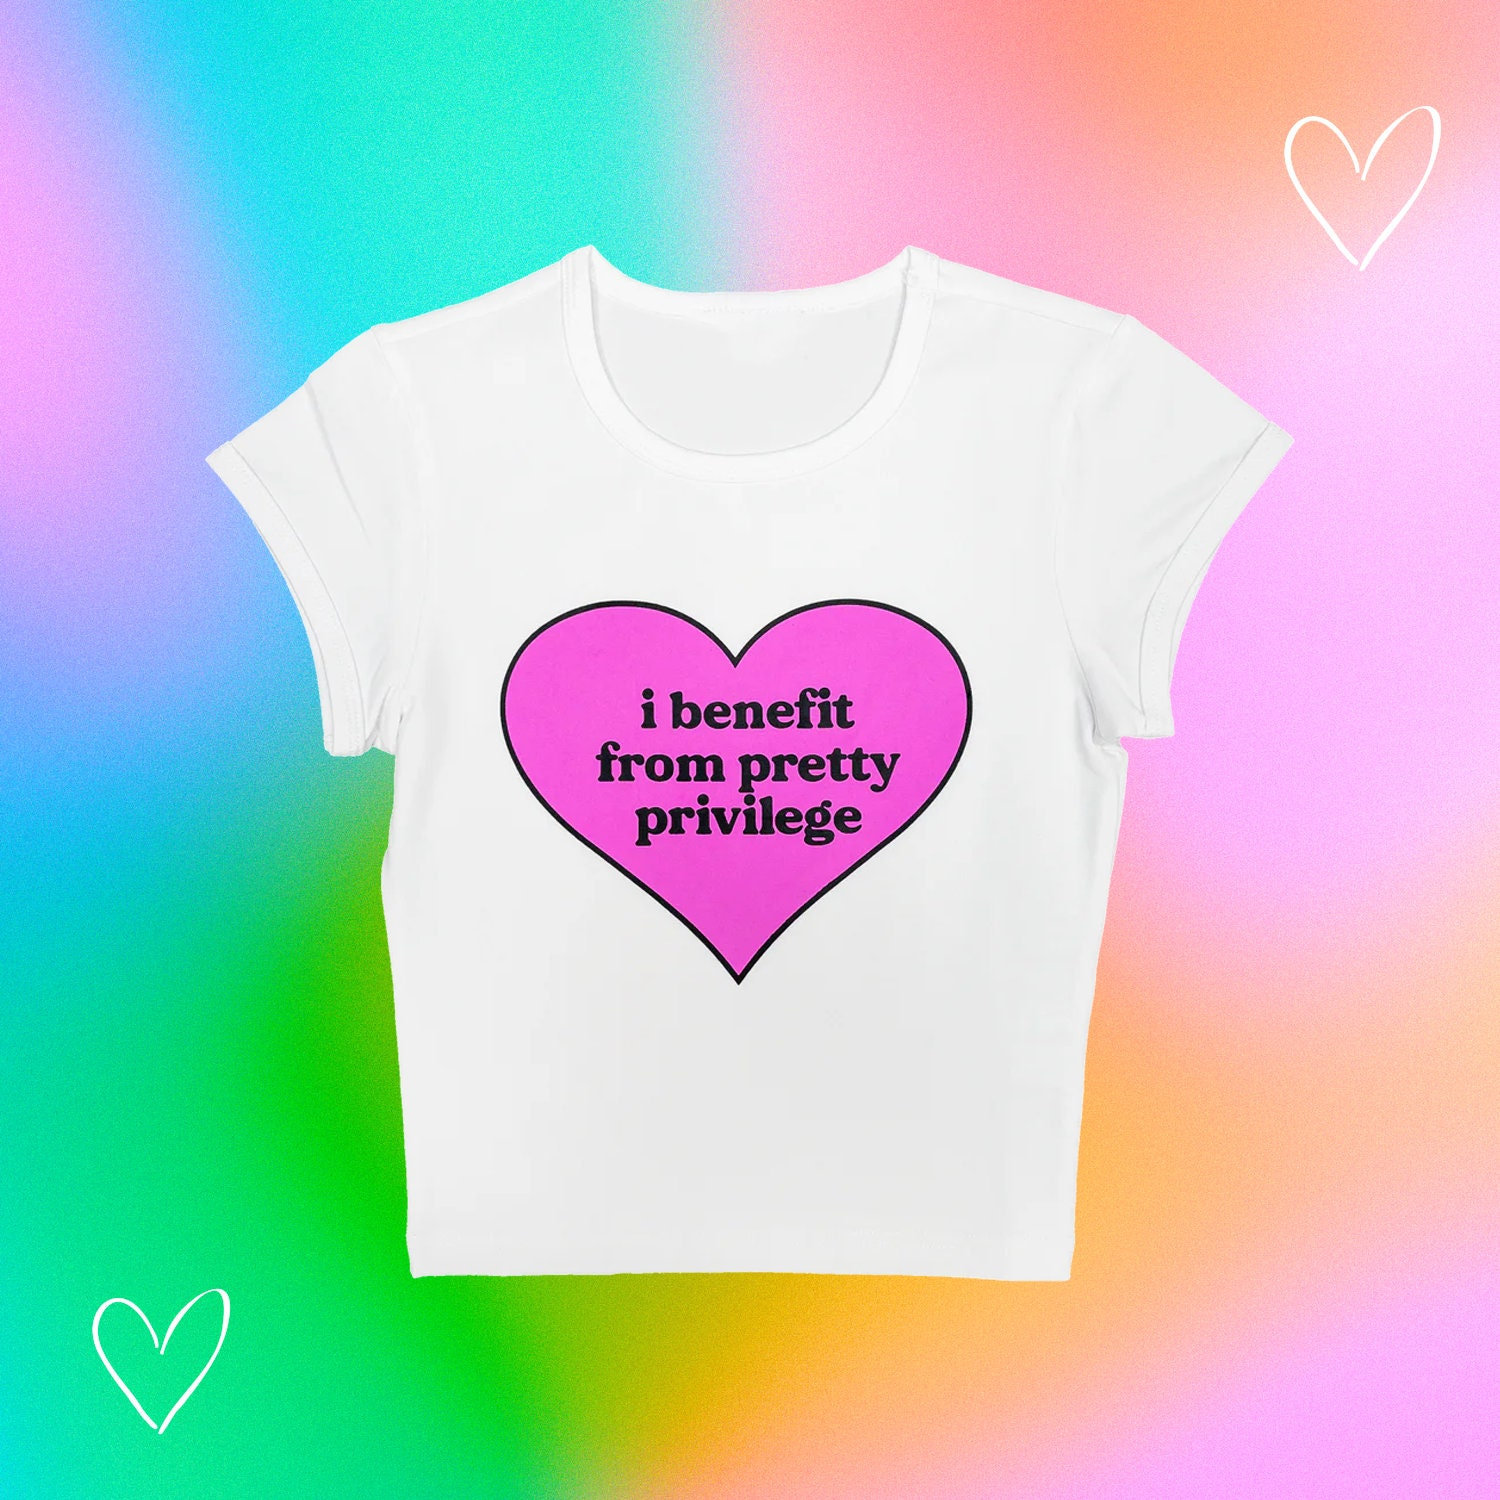 90s Inspired Y2K Clothing: Pretty Privilege Baby Tee